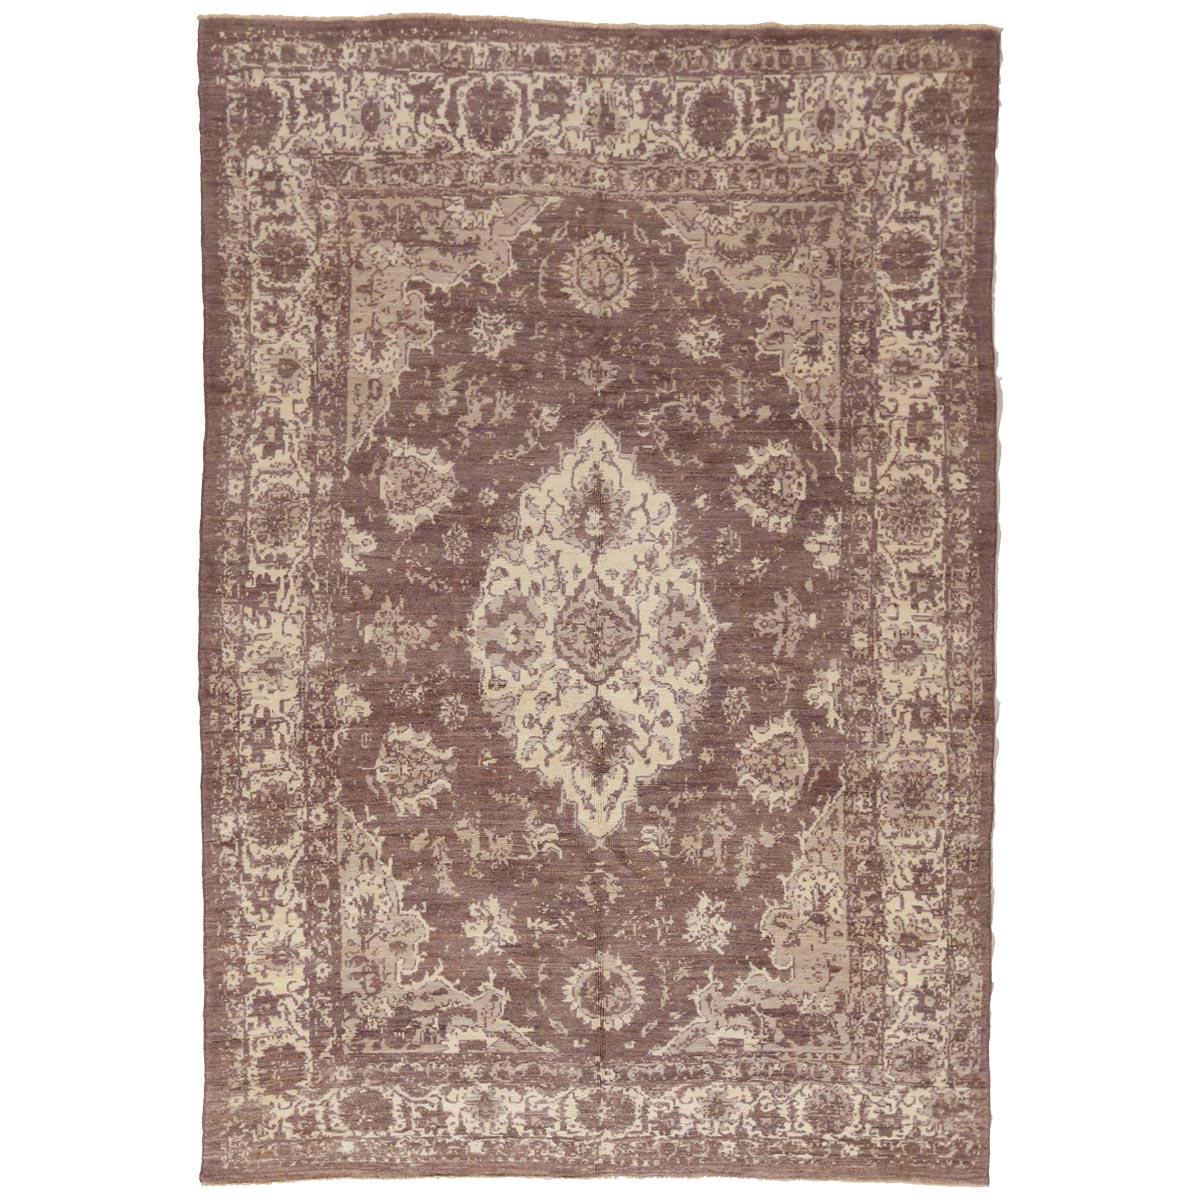 Modern Persian Rug Oushak Design with Large Ivory Medallion over Brown Field